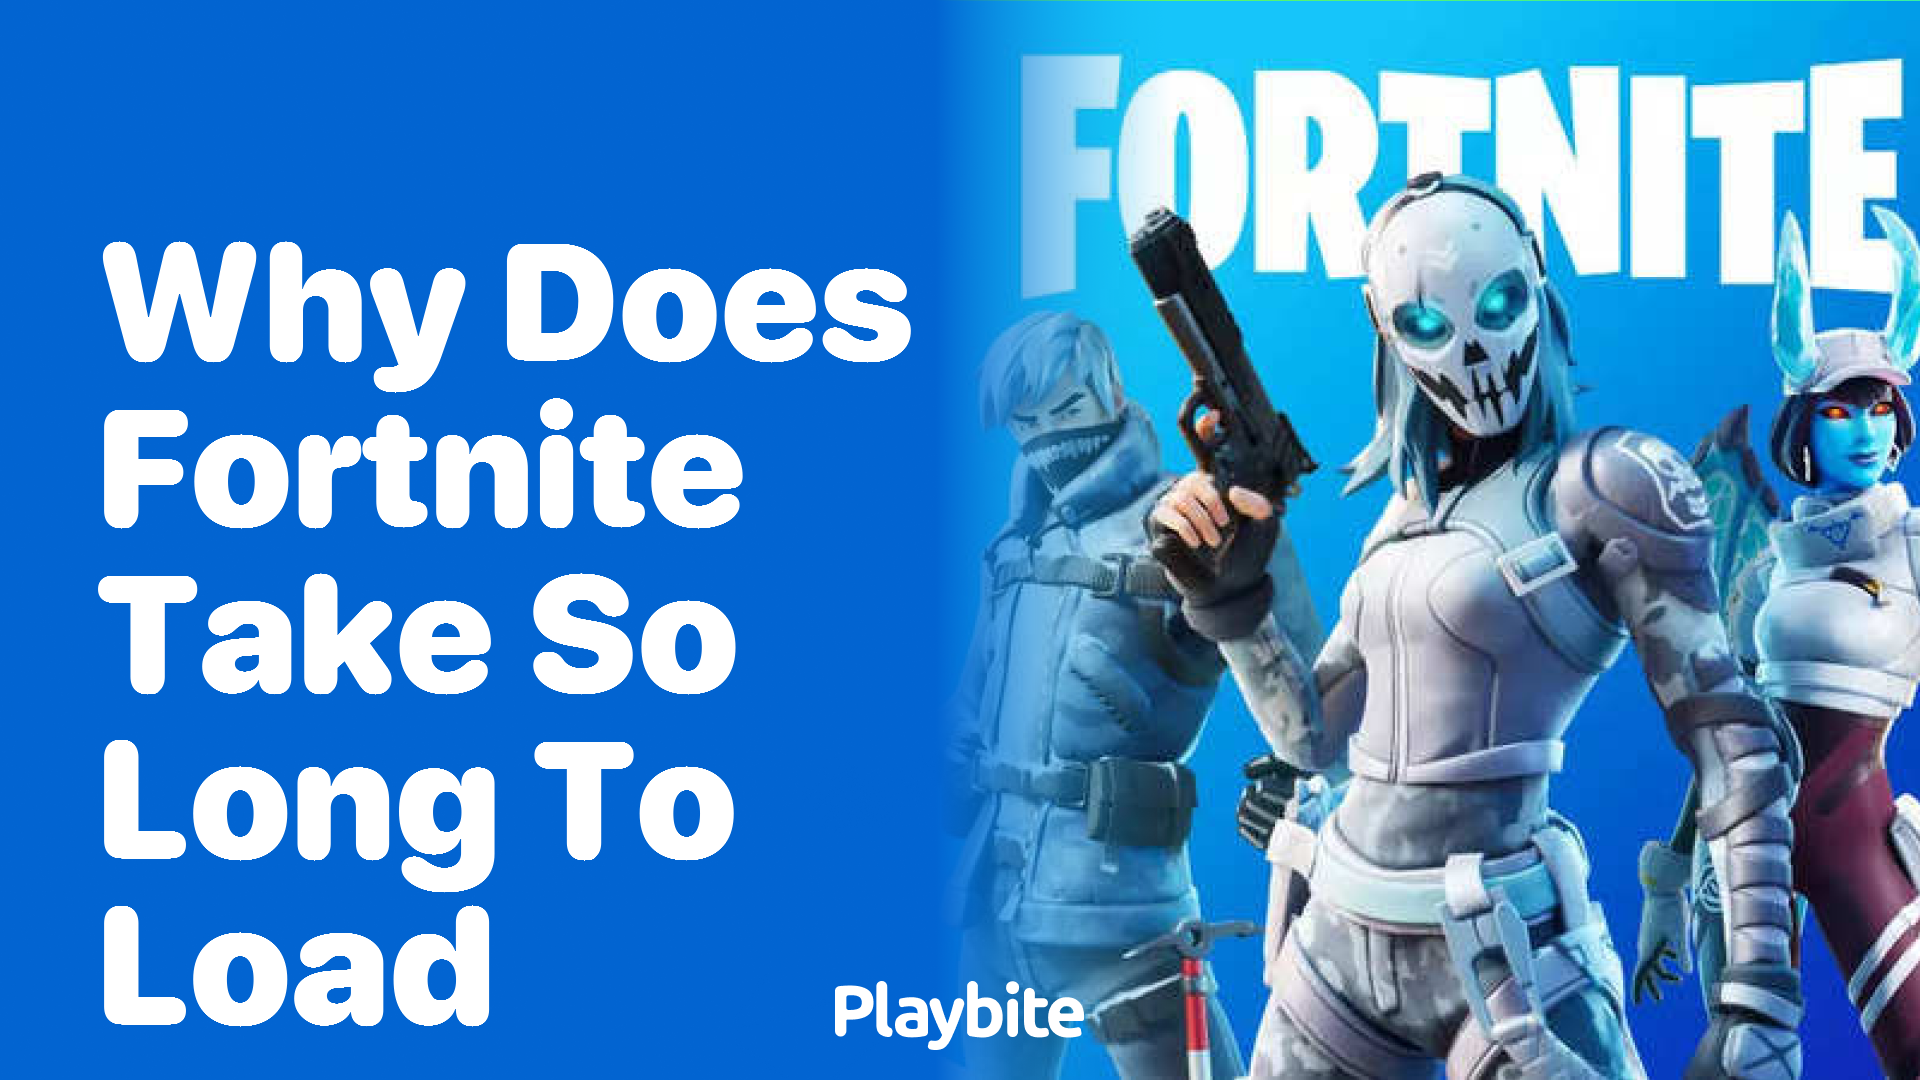 Why Does Fortnite Take So Long to Load?